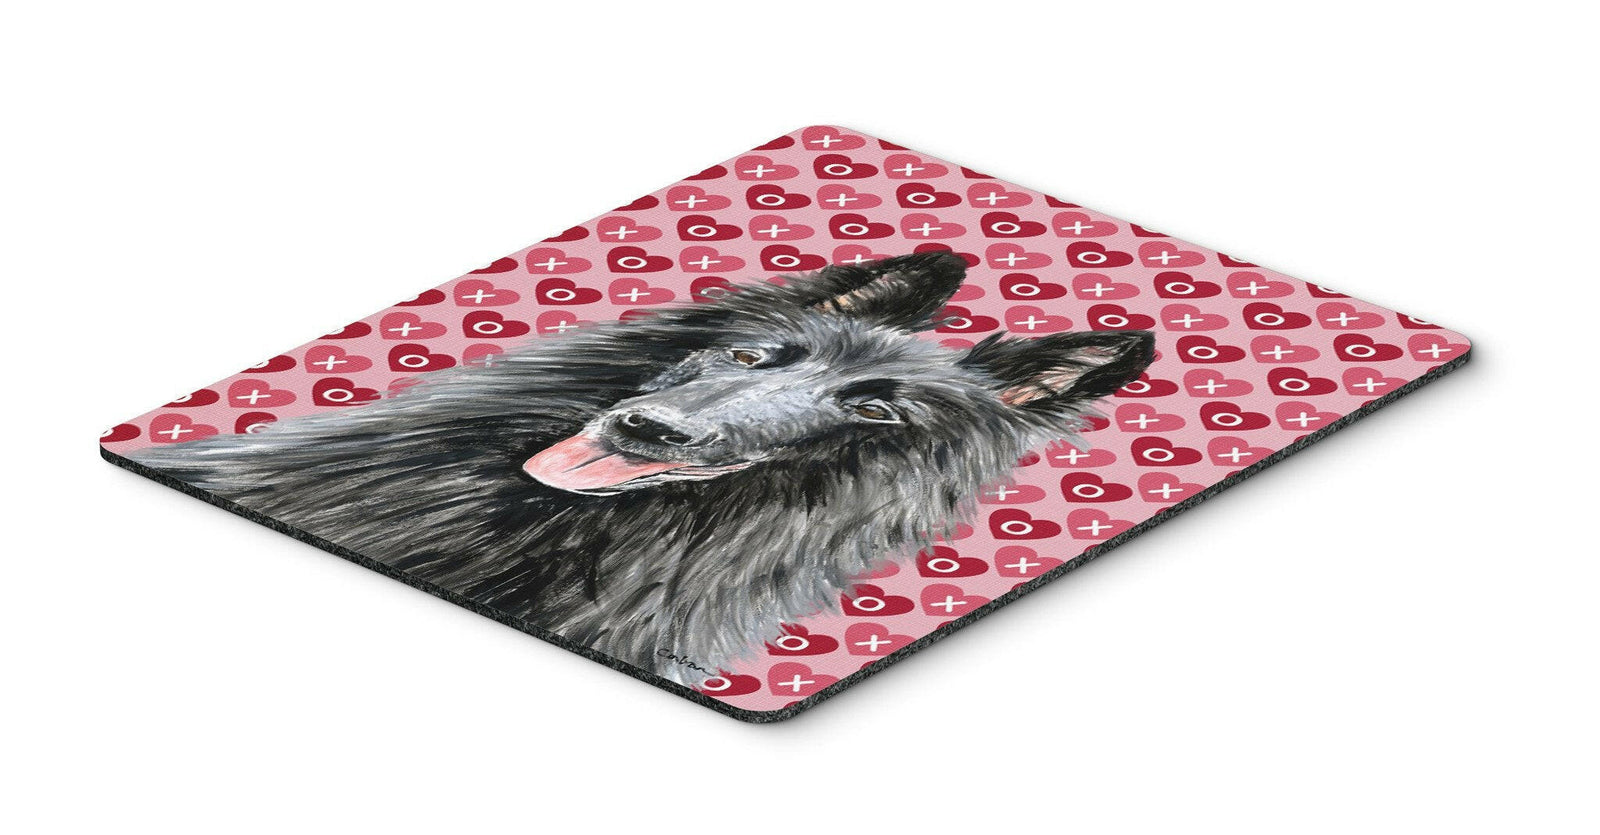 Belgian Sheepdog Hearts Love and Valentine's Day Mouse Pad, Hot Pad or Trivet by Caroline's Treasures